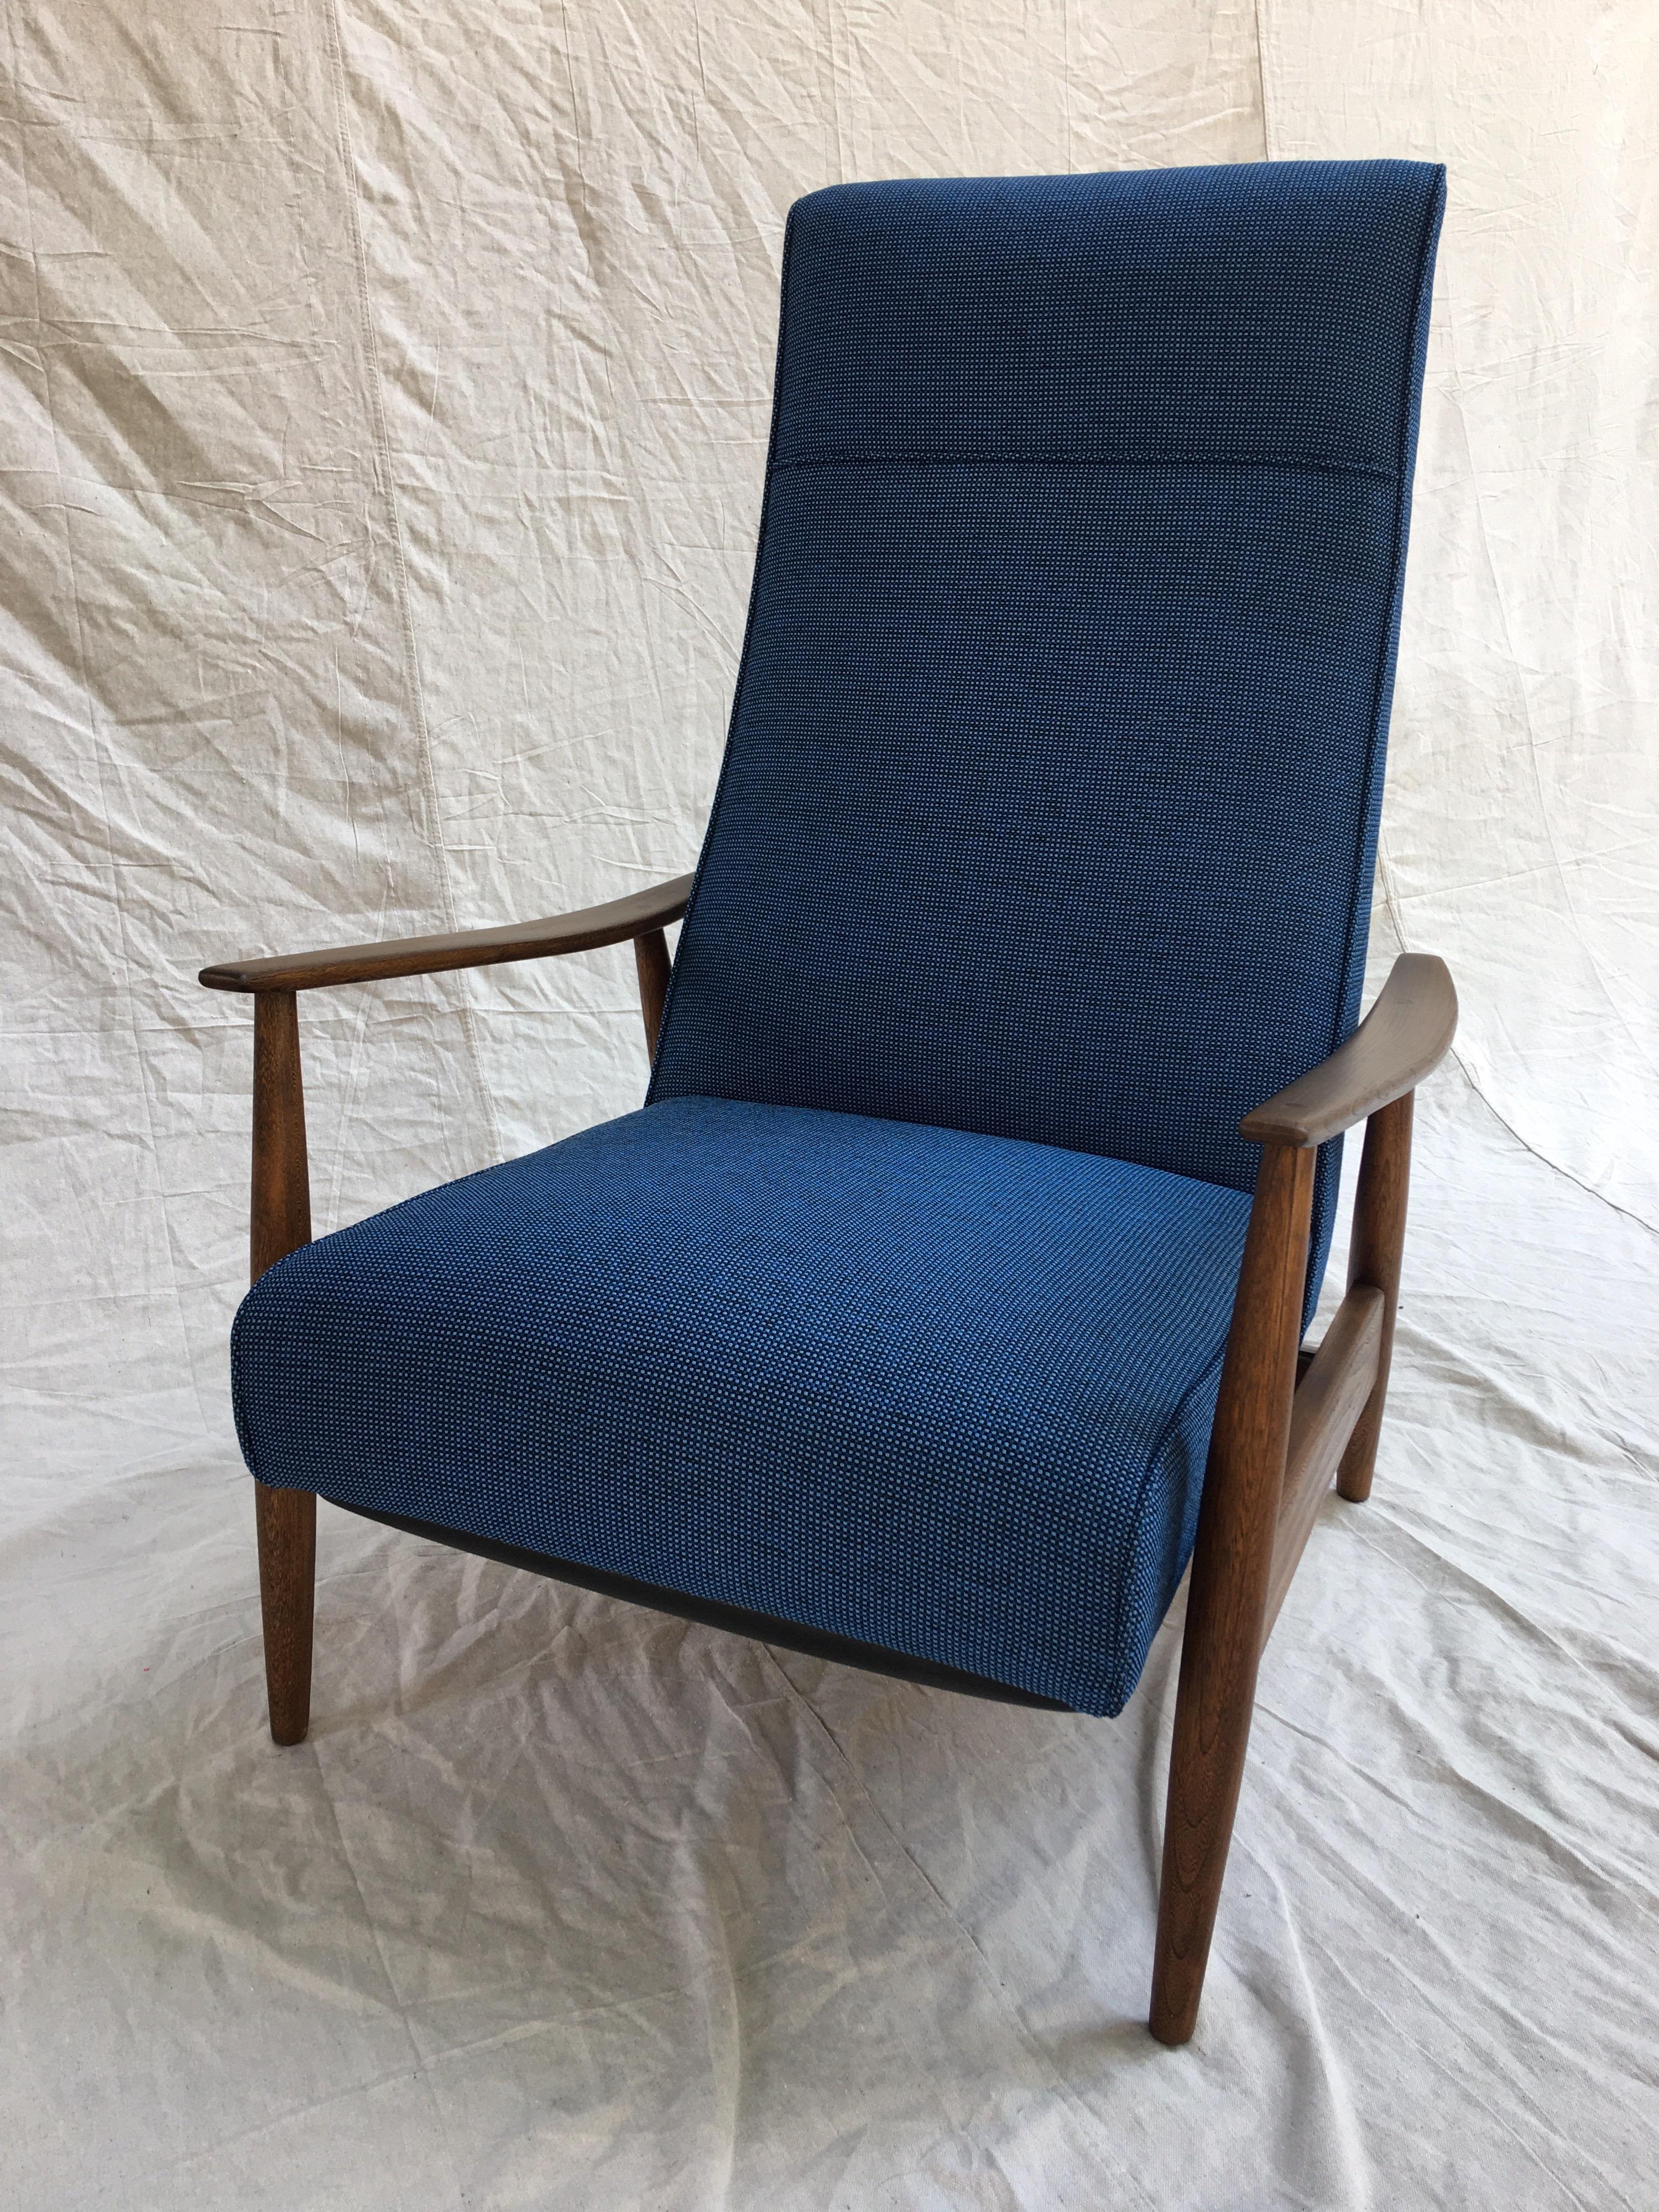 1960s Recliner in the style of Milo Baughman 1